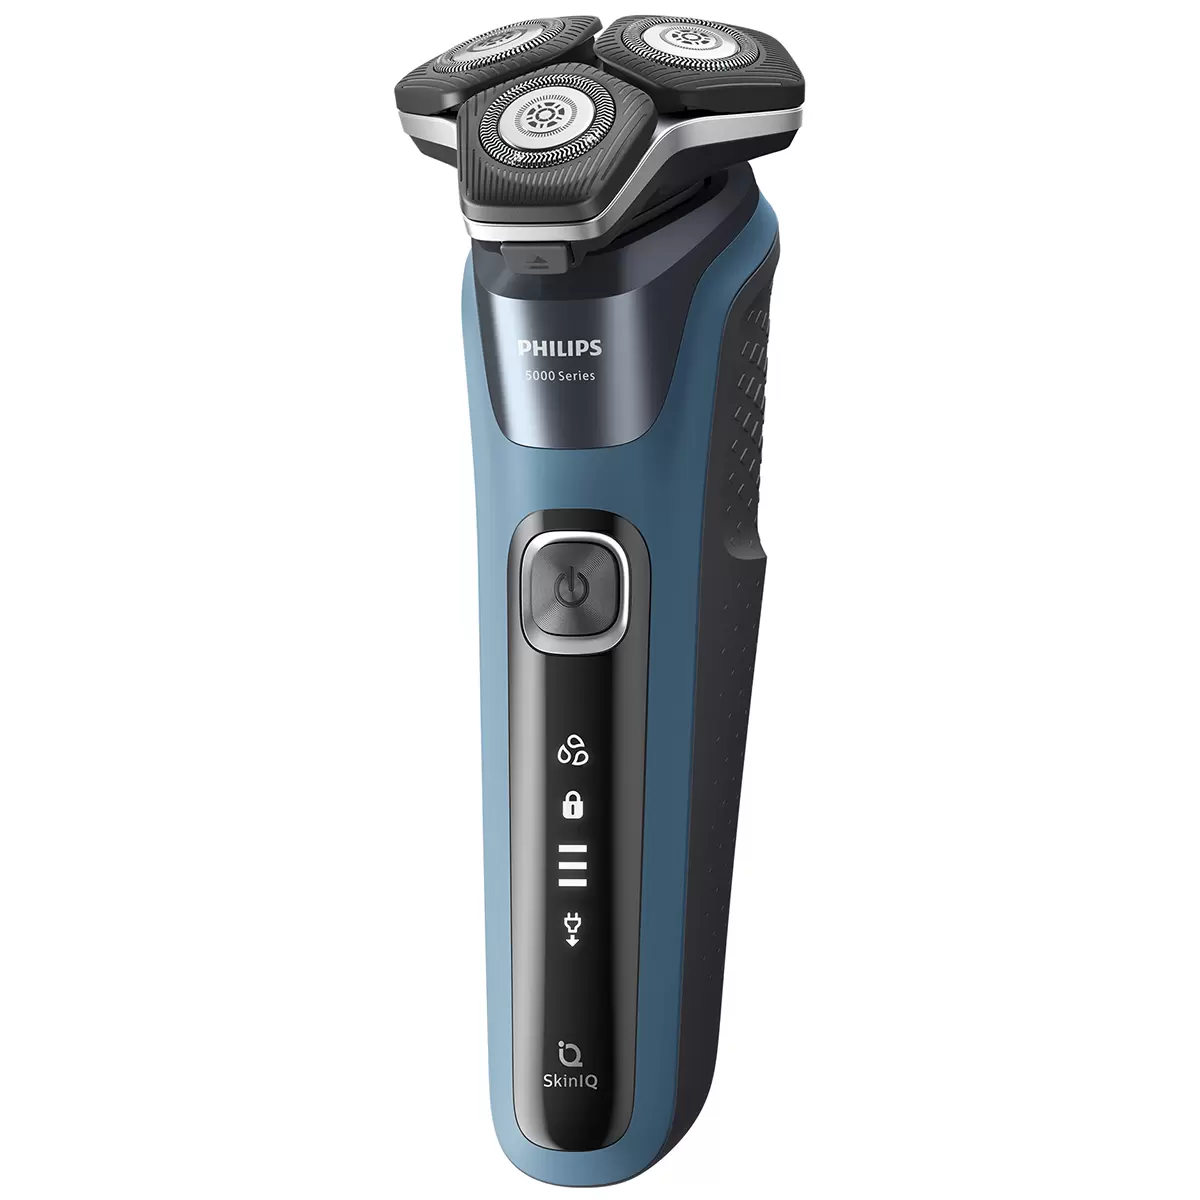 Philips Shaver Series 5000 And Body Shaver Bundle Pack 6003631